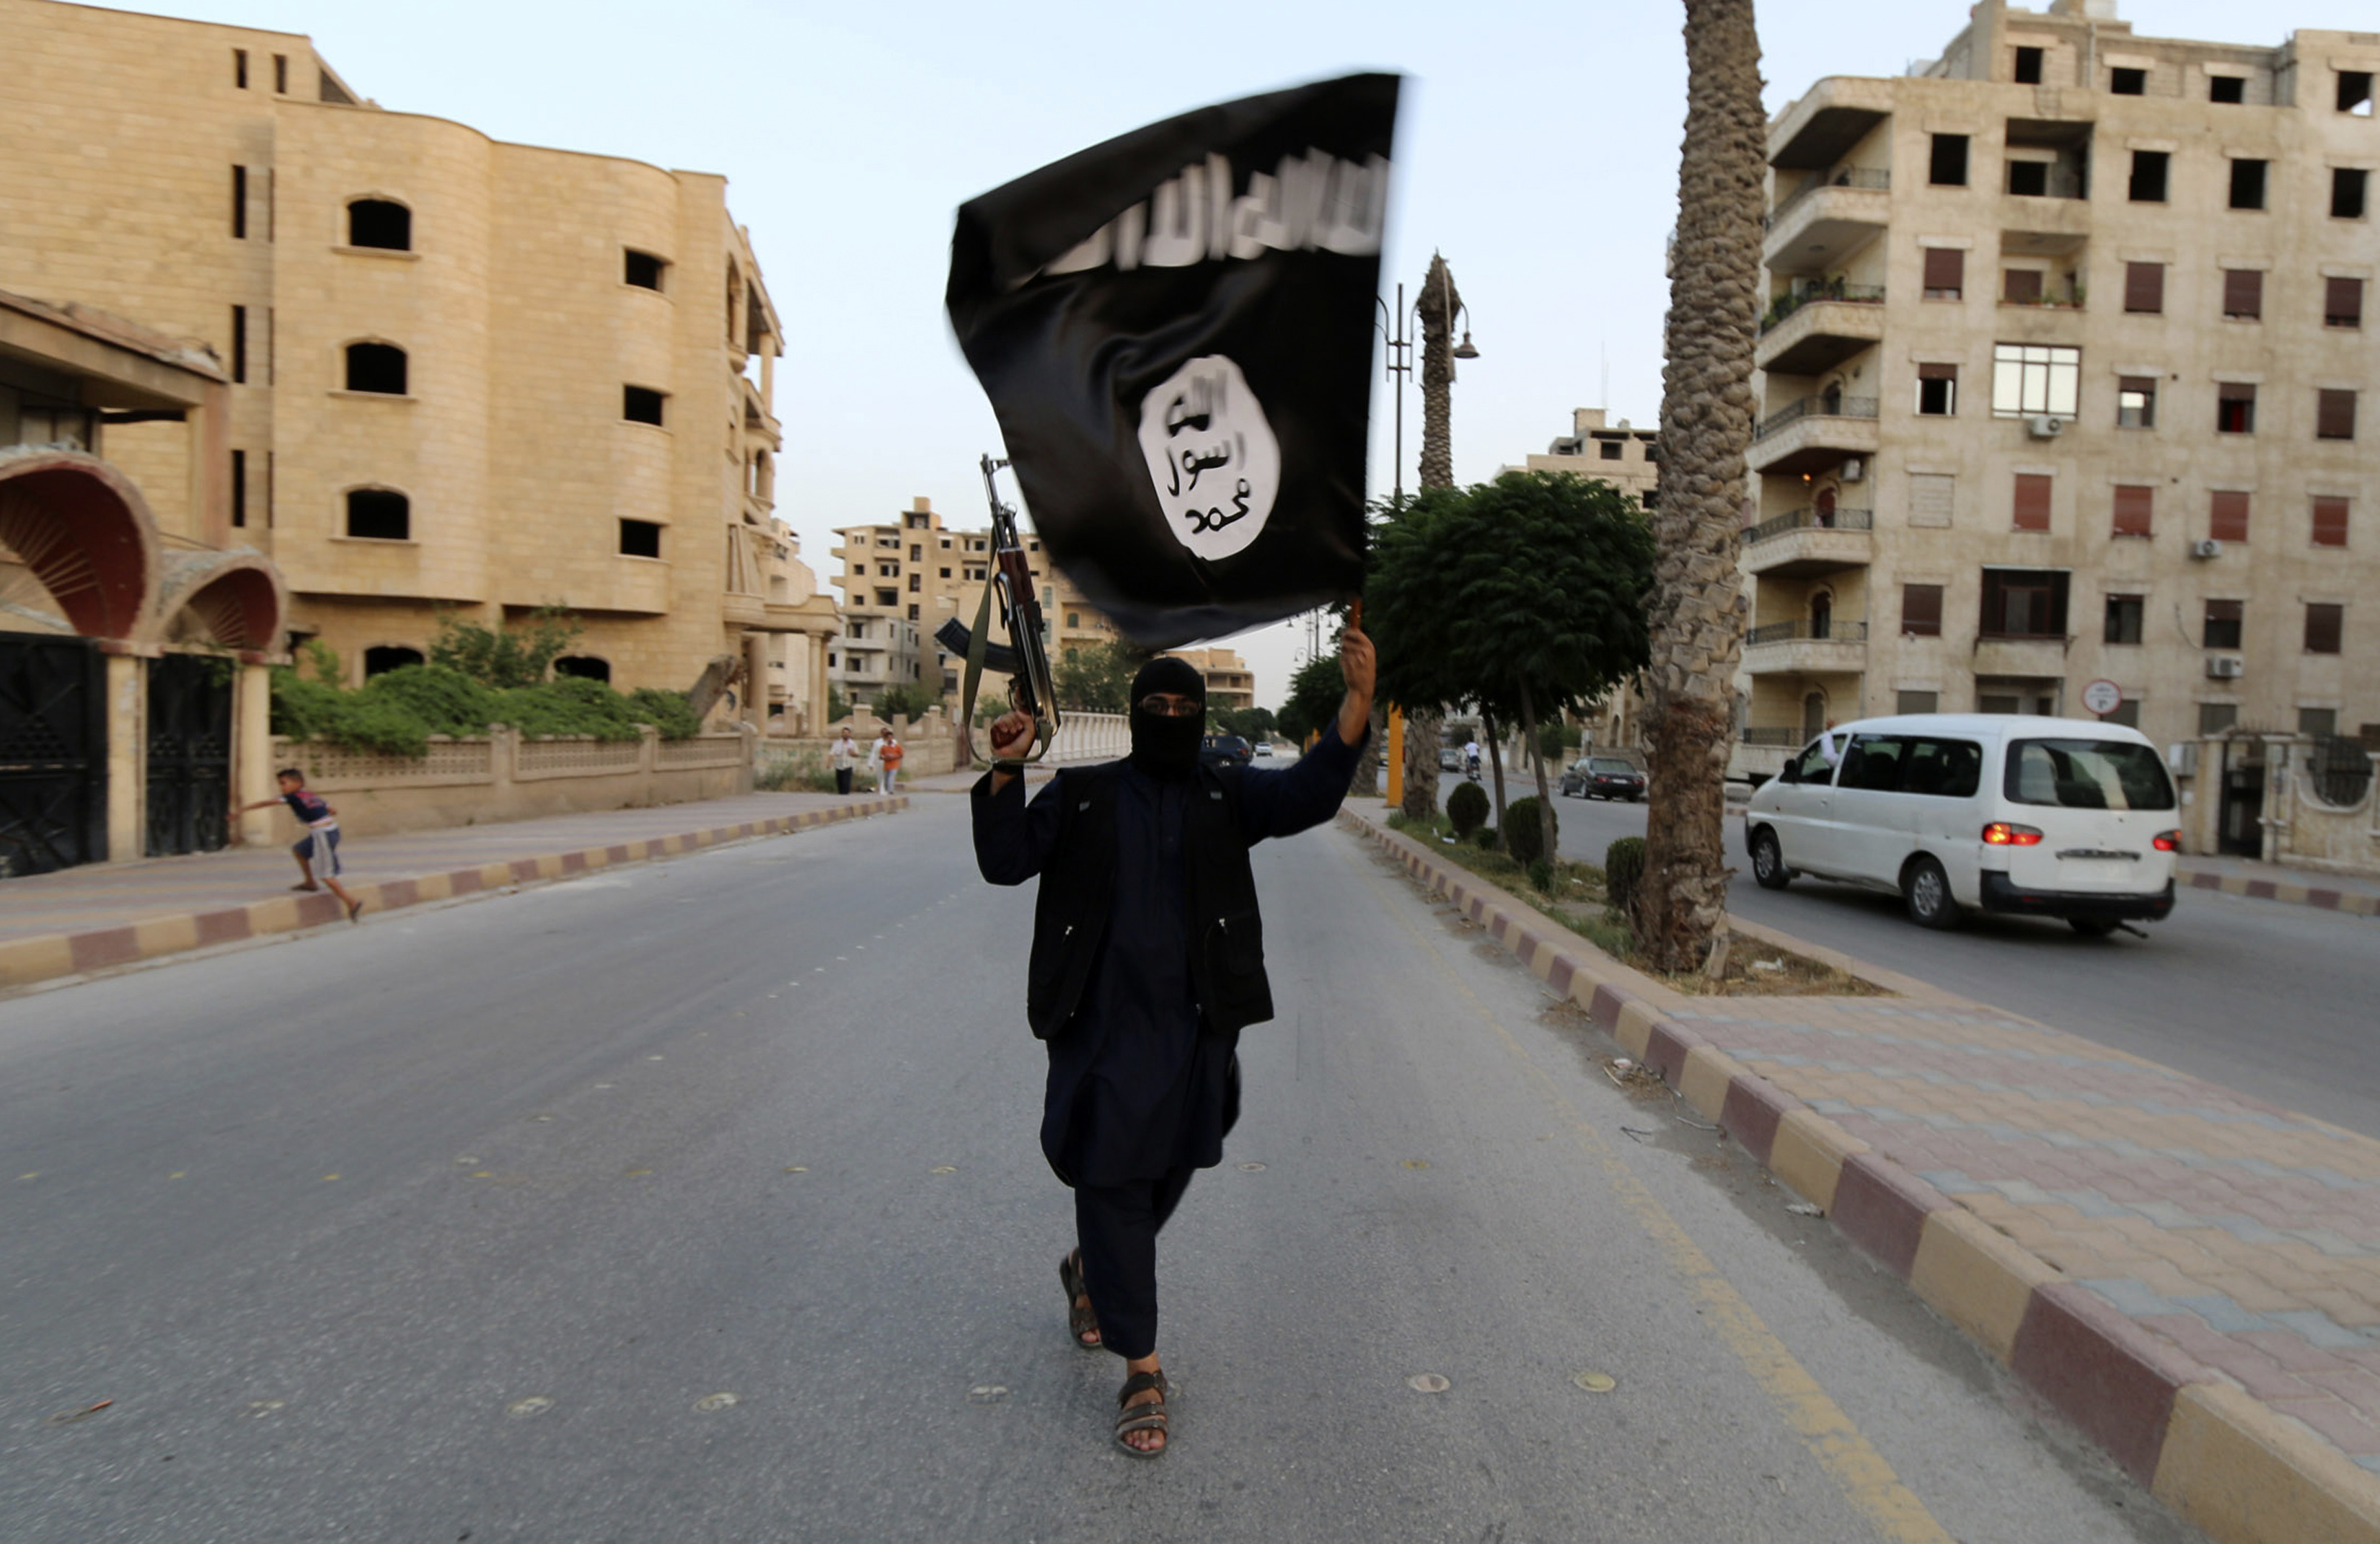 A member loyal to the Islamic State in Iraq and the Syria waves an ISIS flag in Raqqa, Syria on June 29, 2014. (Reuters)